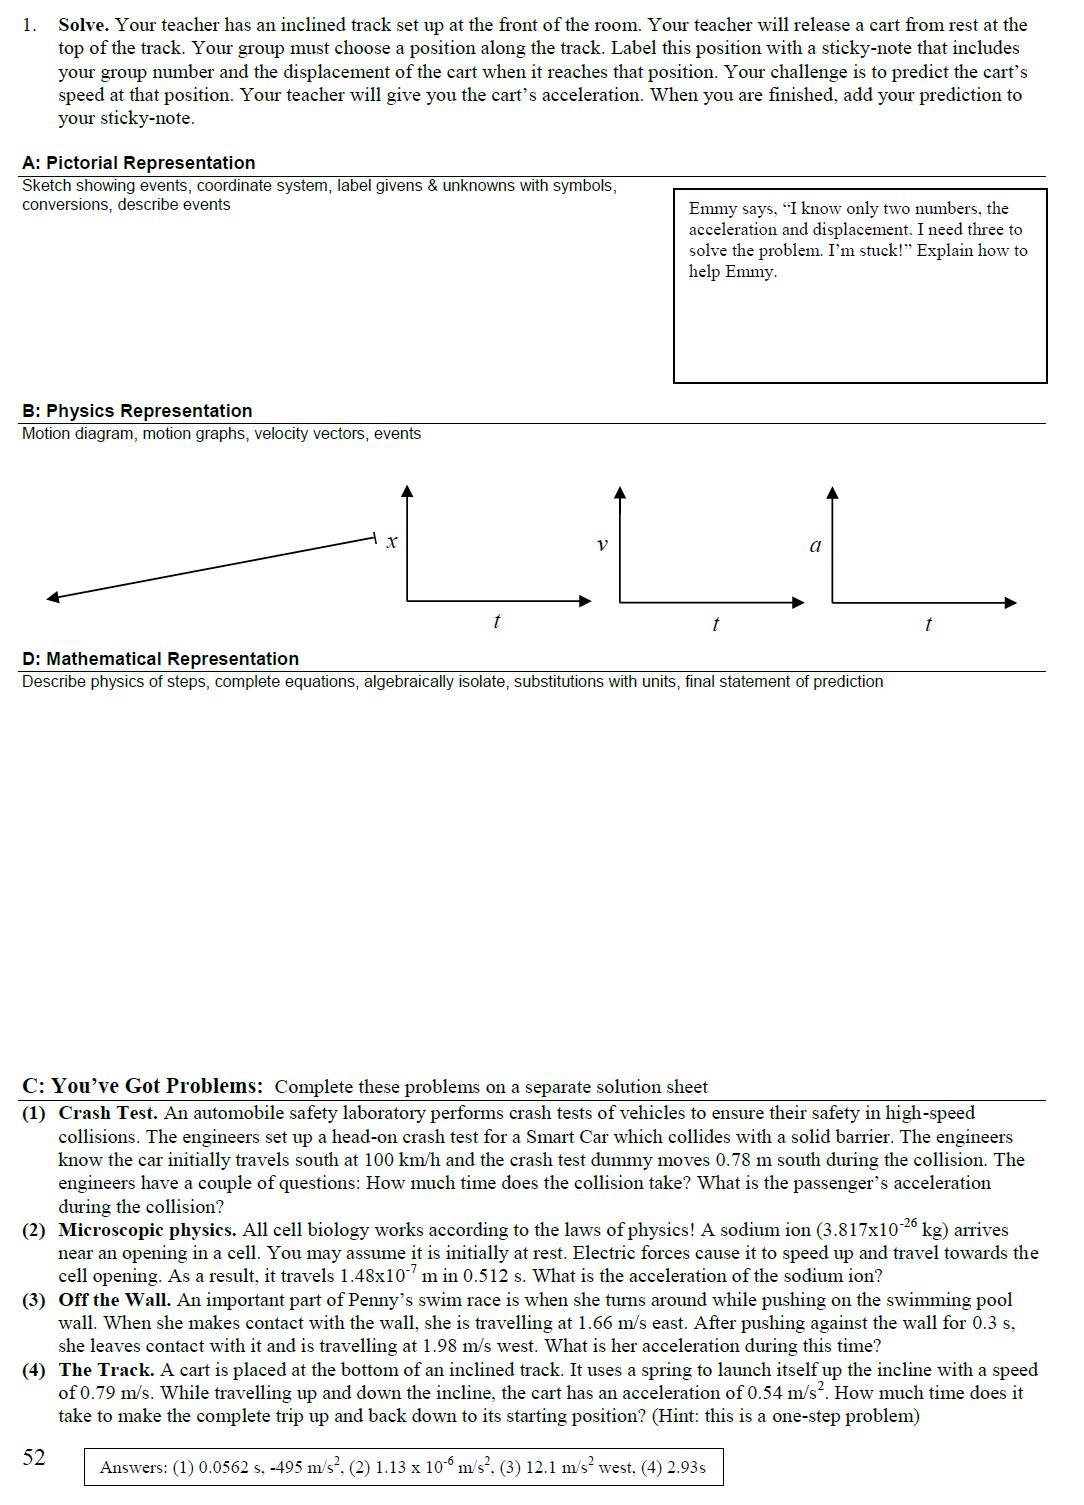 107-image 9 - activity page 2